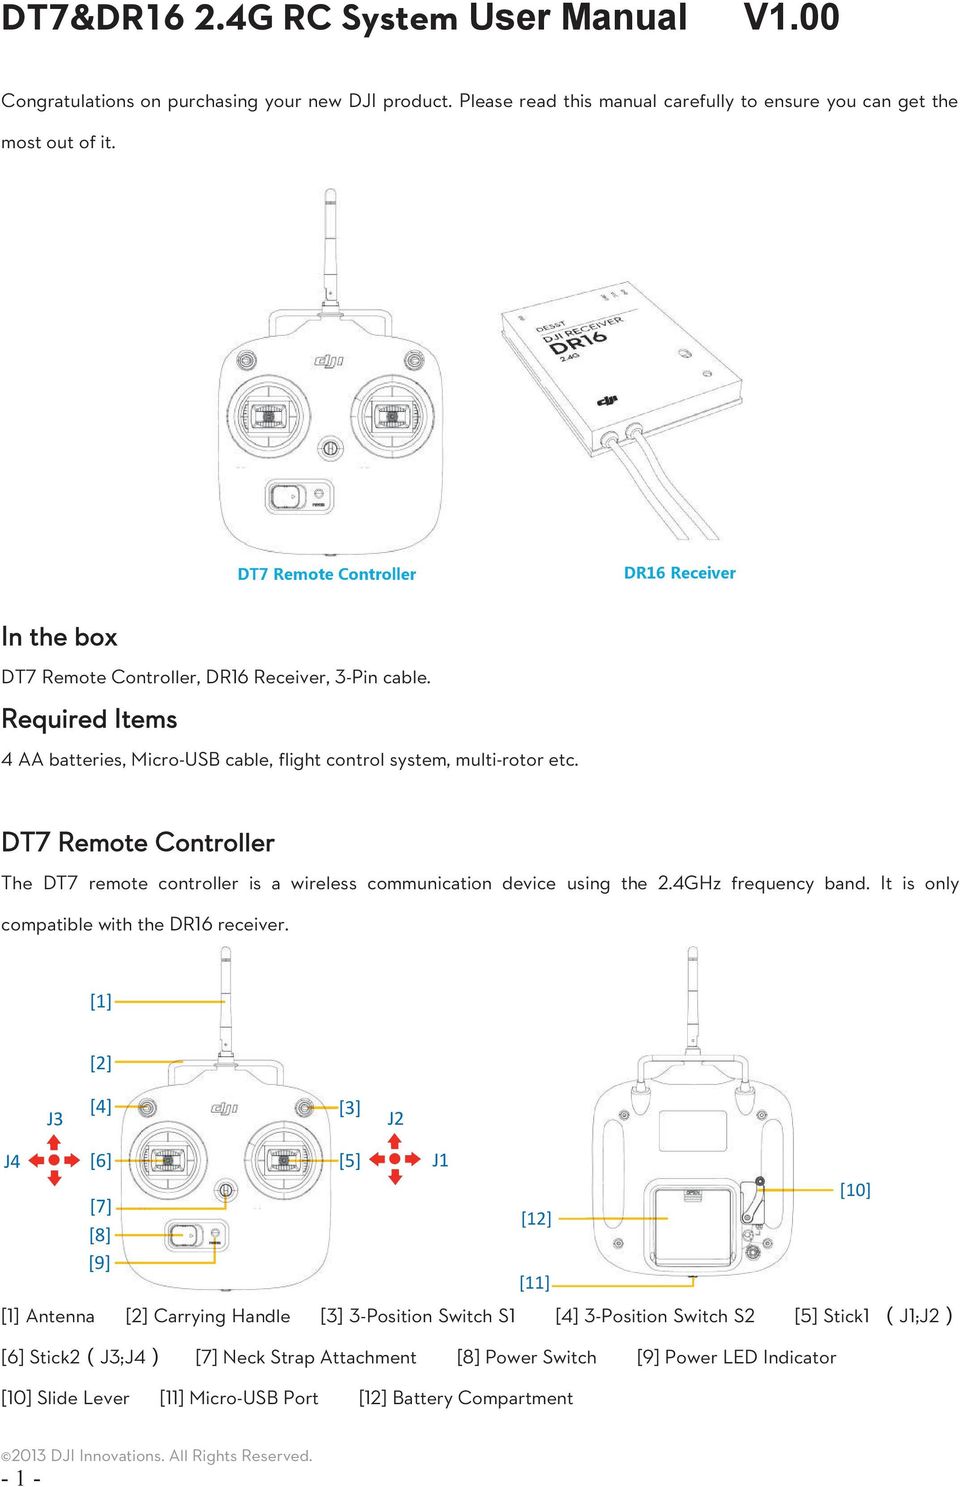 DT7 Remote Controller The DT7 remote controller is a wireless communication device using the 2.4GHz frequency band. It is only compatible with the DR16 receiver.